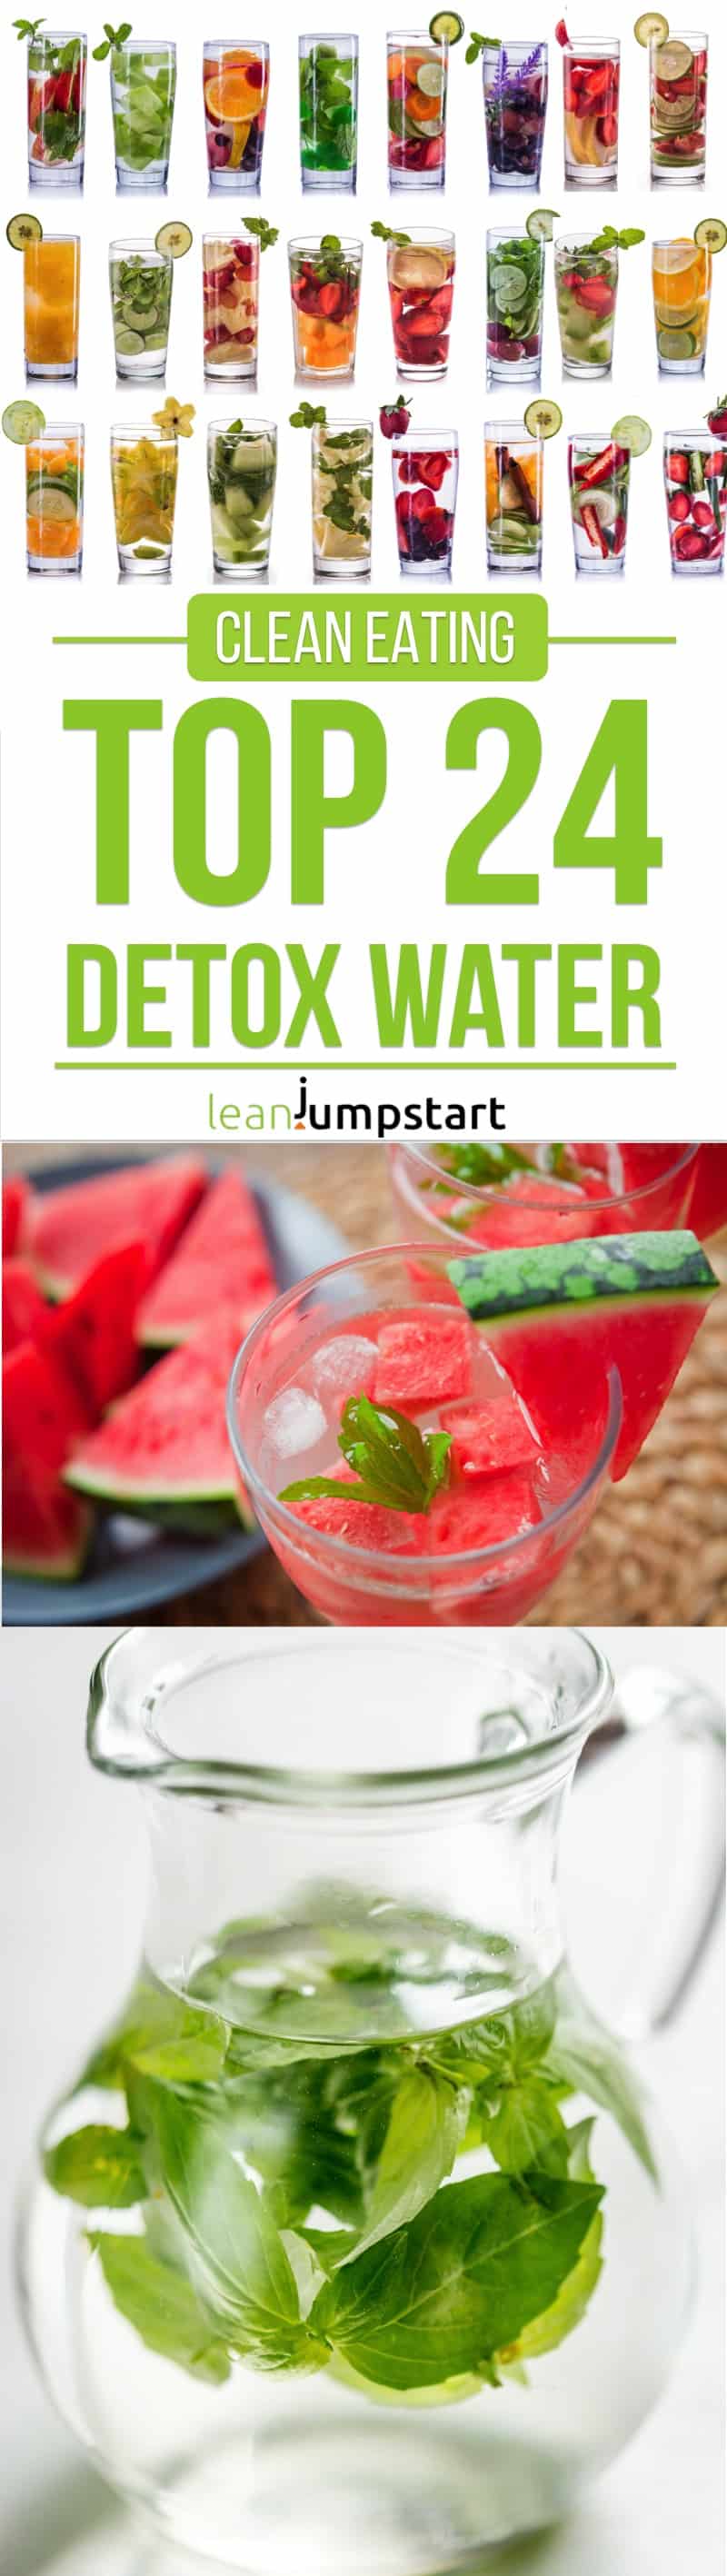 24 detox water recipes: fruit infused drinks for weight loss